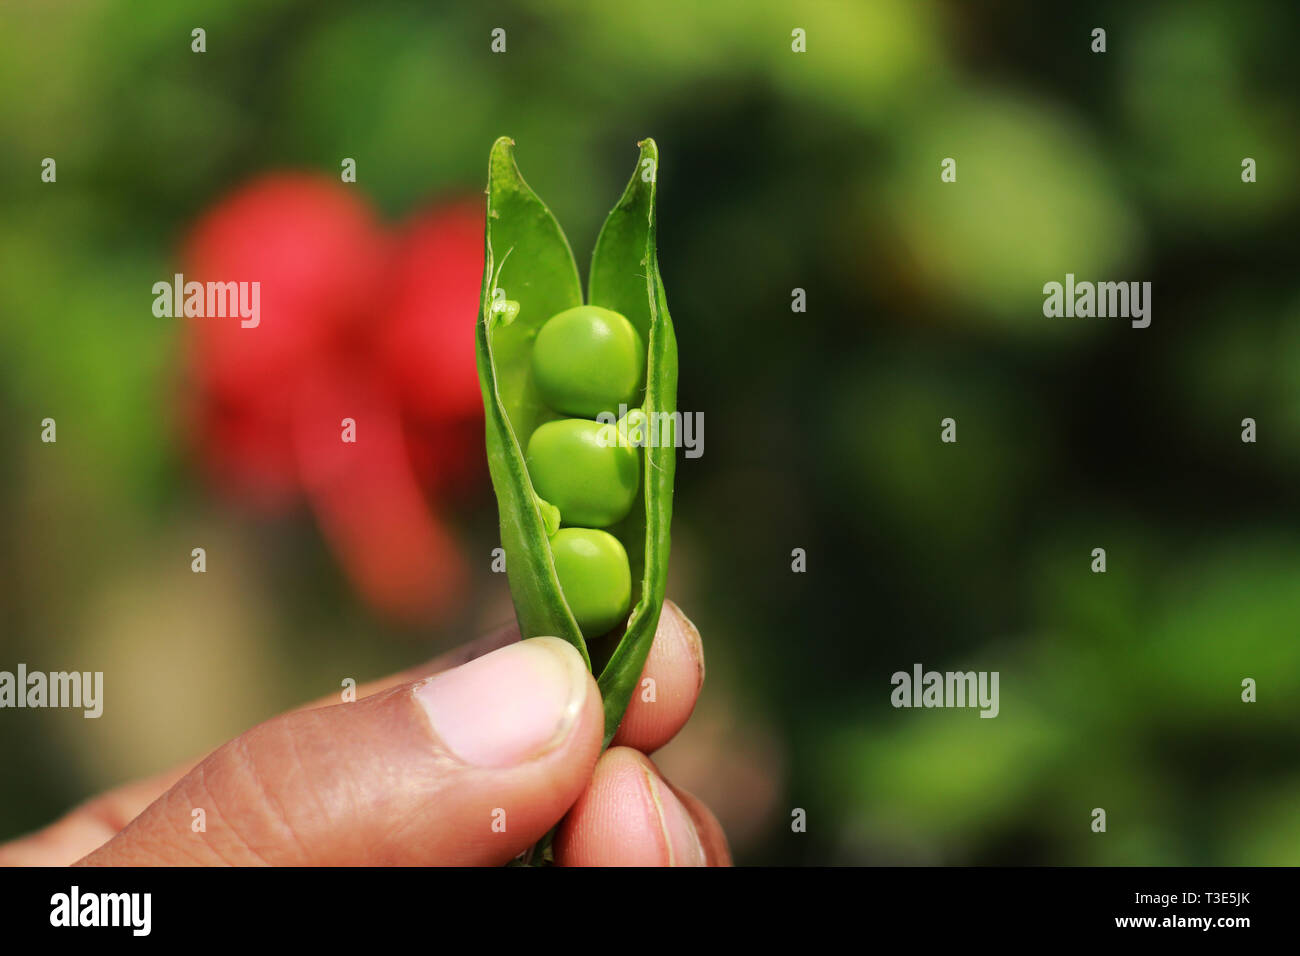 open marrowfat and hand with soft background vegetable Stock Photo